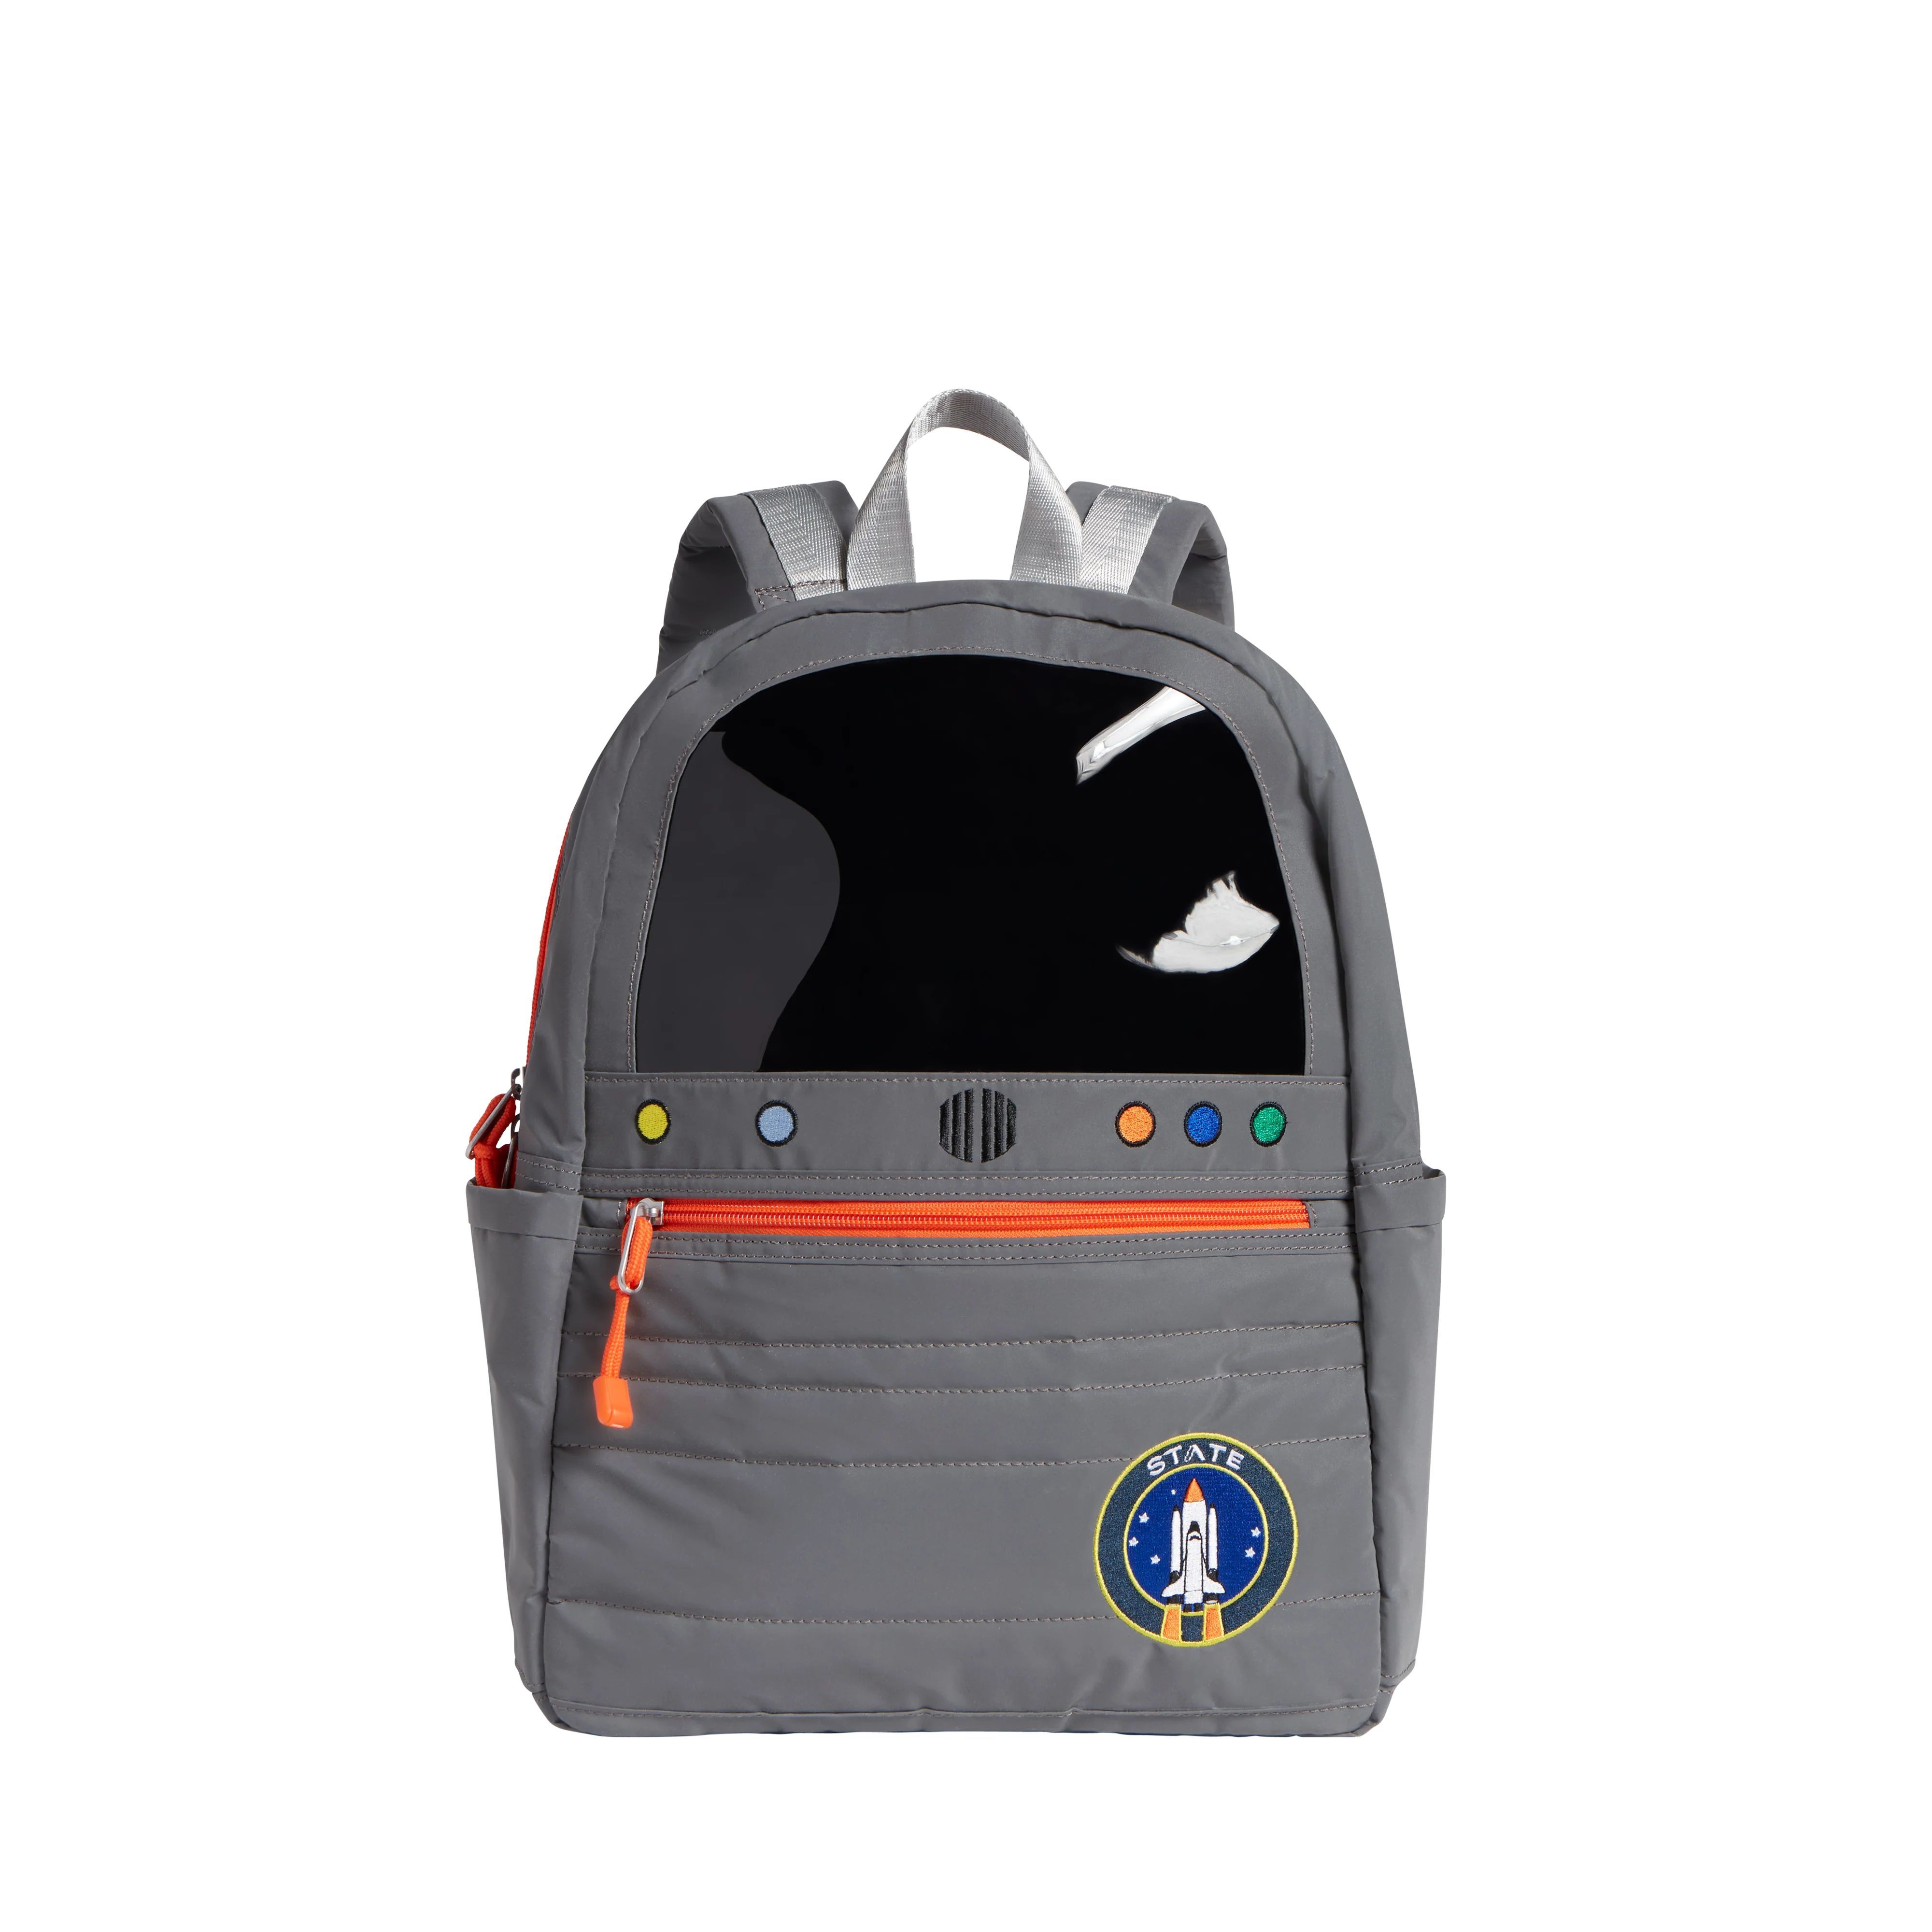 STATE Bags | Kane Kids Travel Backpack Reflective Astronaut | STATE Bags